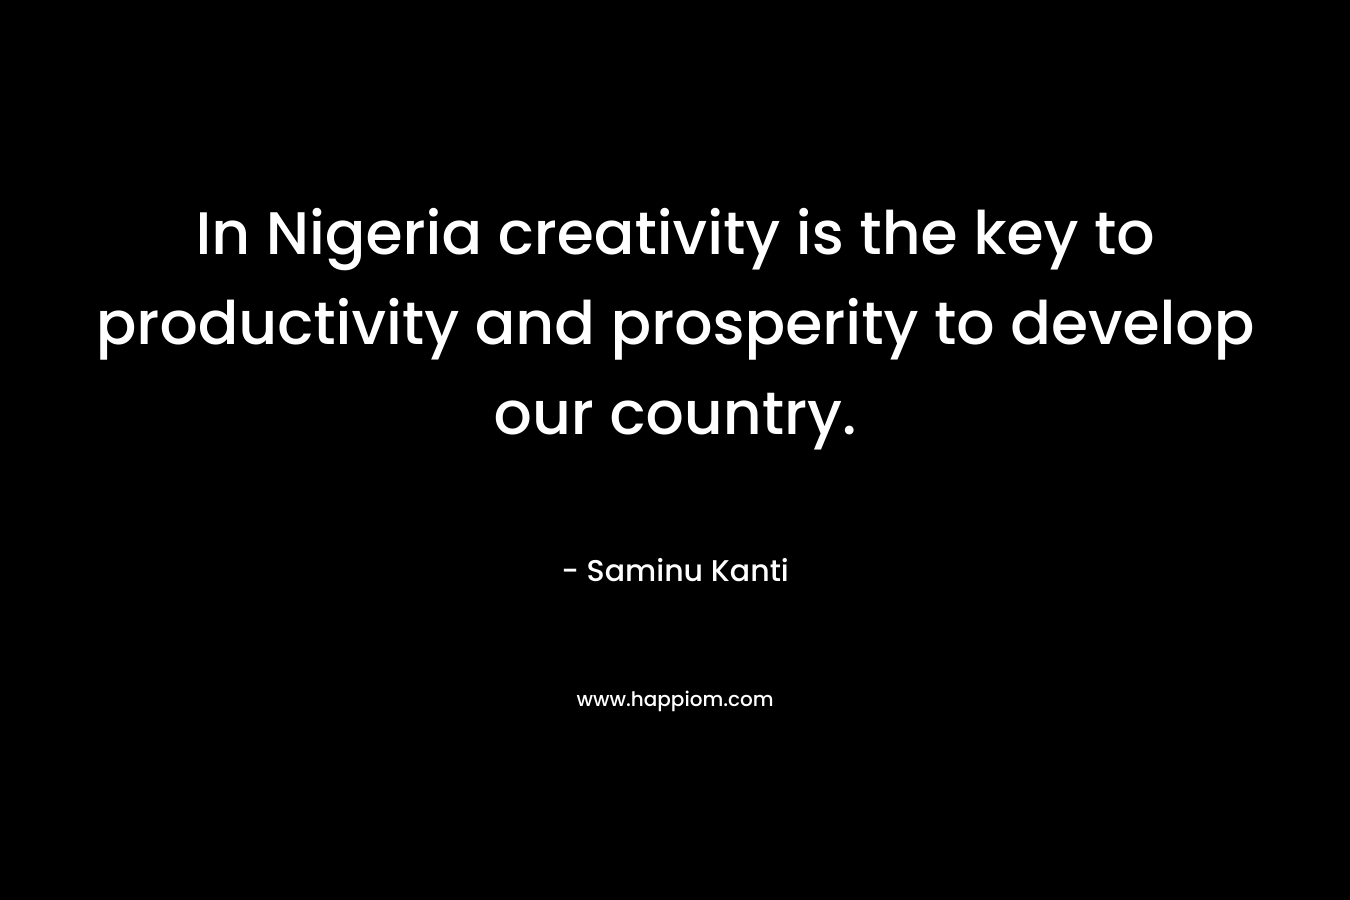 In Nigeria creativity is the key to productivity and prosperity to develop our country. – Saminu Kanti